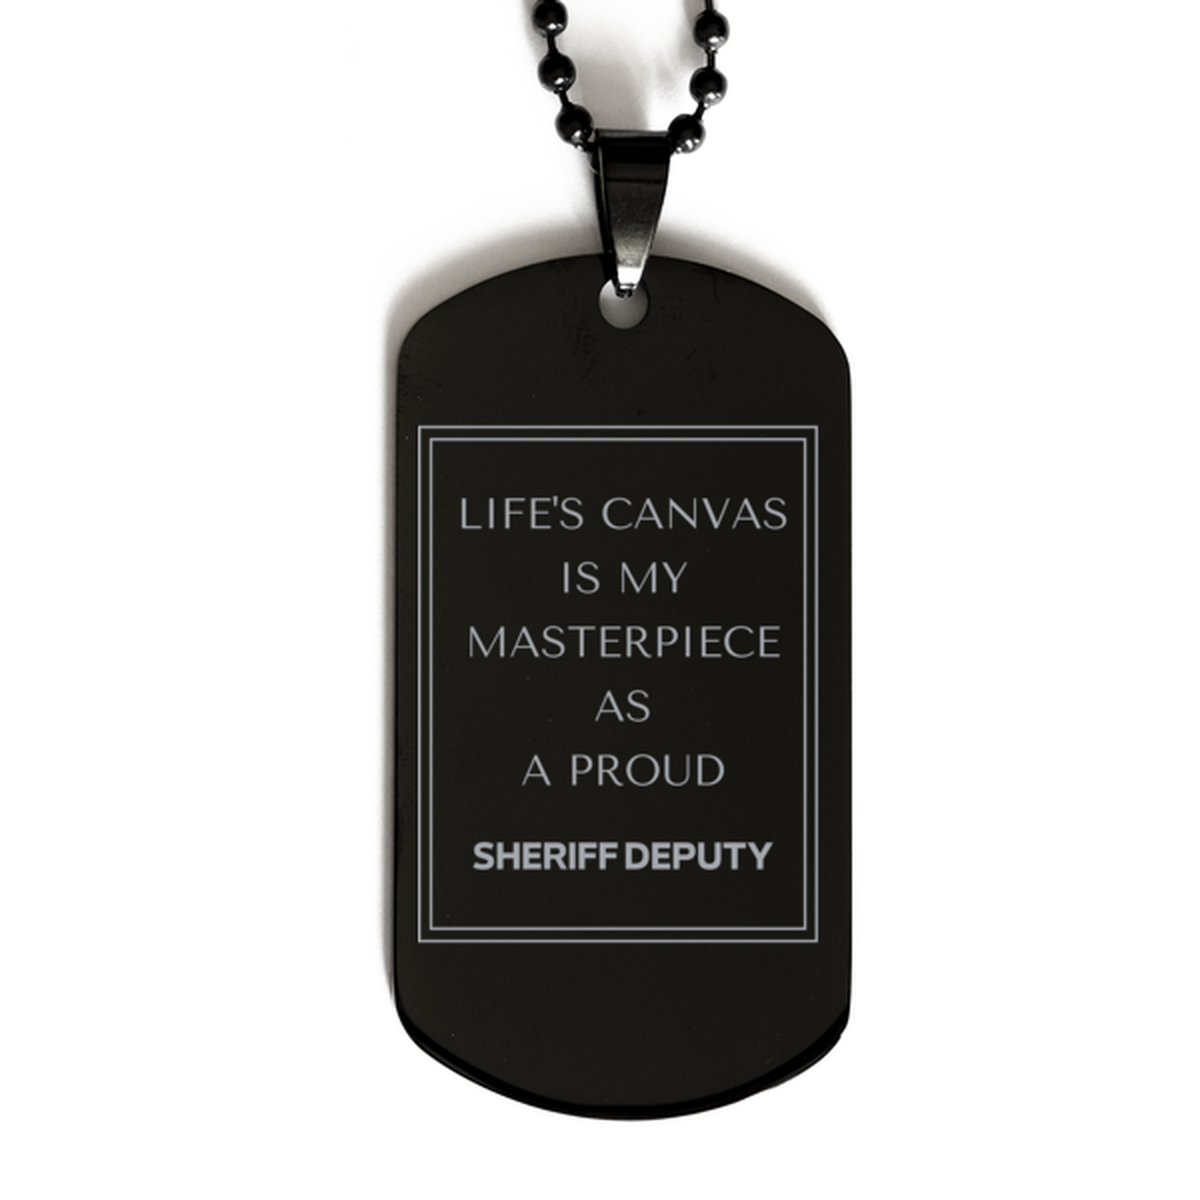 Proud Sheriff Deputy Gifts, Life's canvas is my masterpiece, Epic Birthday Christmas Unique Black Dog Tag For Sheriff Deputy, Coworkers, Men, Women, Friends